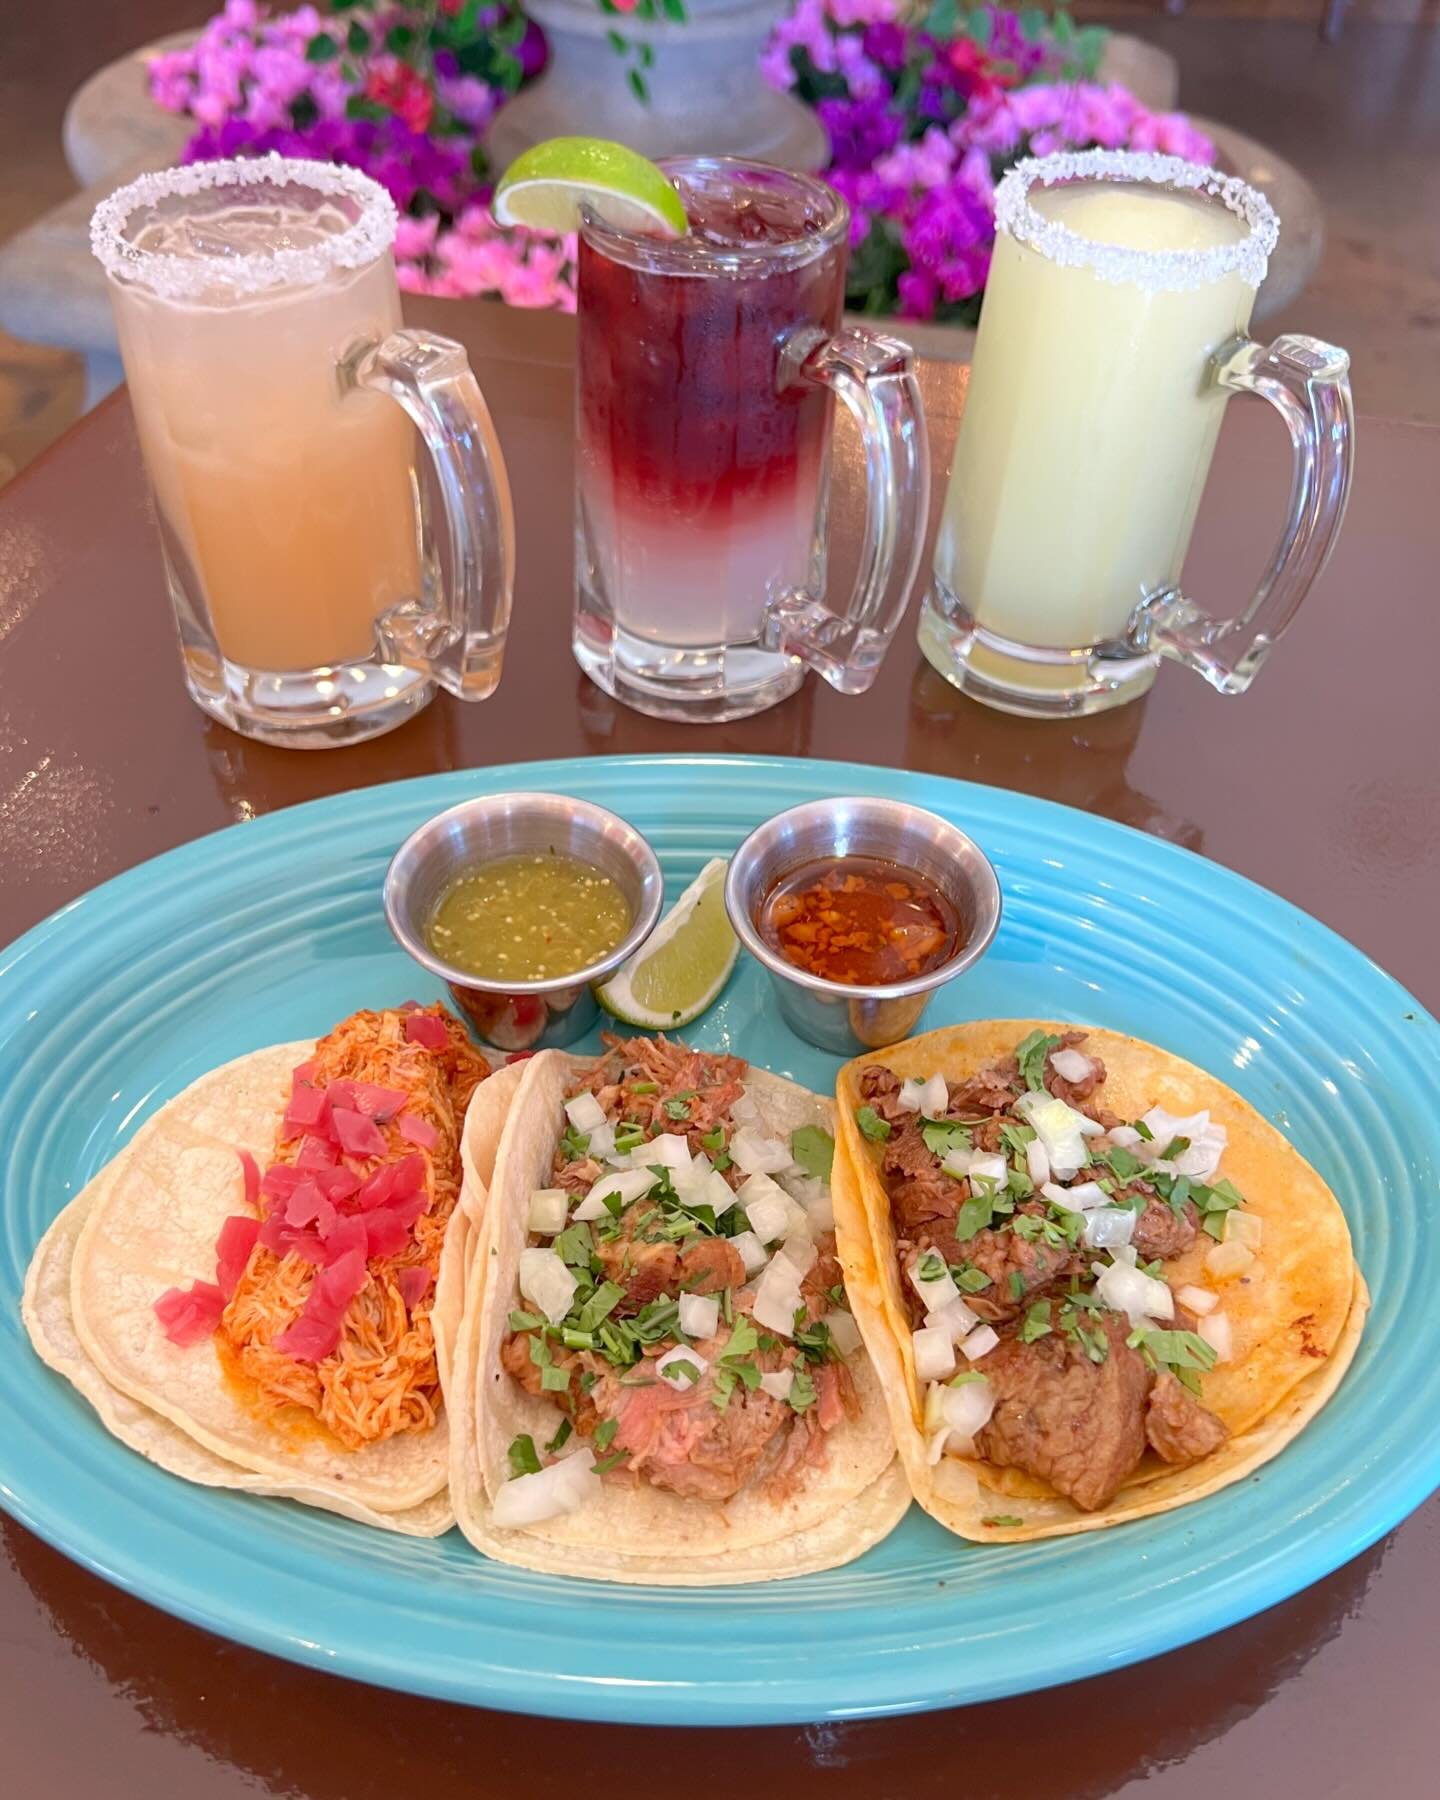 Don&rsquo;t miss out on our Happy Hour this #tacotuesday 
3 Street tacos x $12
Paloma, Sangr&iacute;a, Margarita $8
Tecate + Tequila $10

#hotplatehotplate #guadgrill #happyhour #streettacos #paloma #sangria #margarita #tequila #tecate #concordeats #